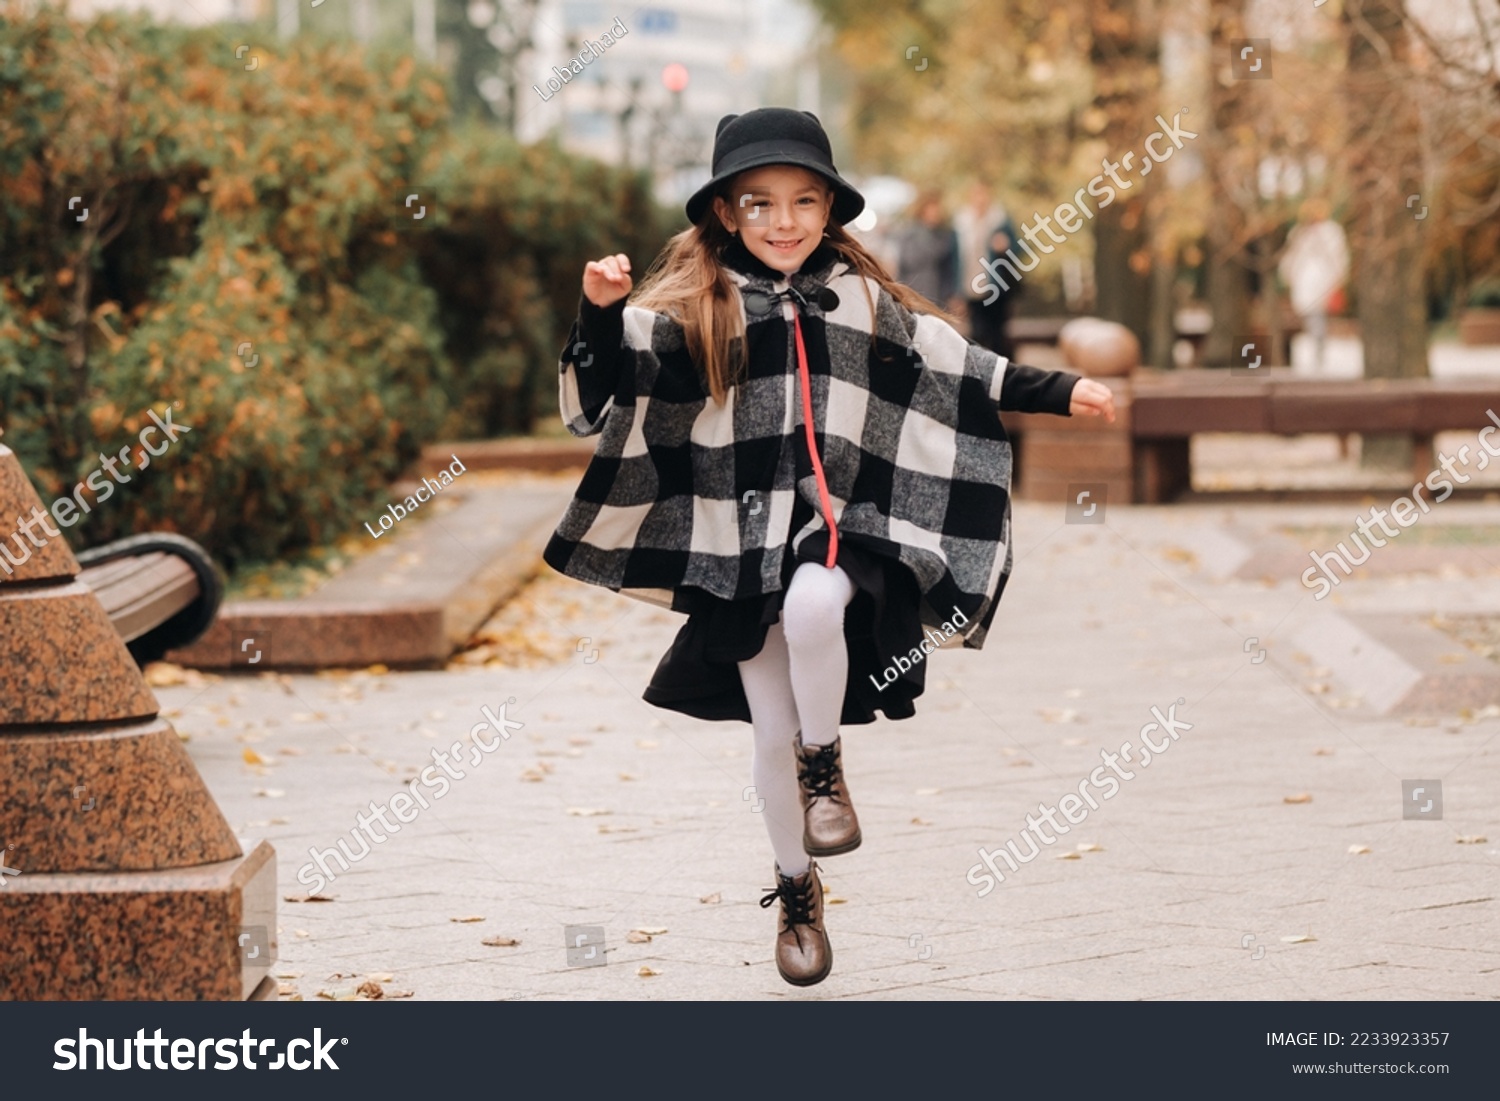 A stylish little girl in a hat walks around the autumn city #2233923357